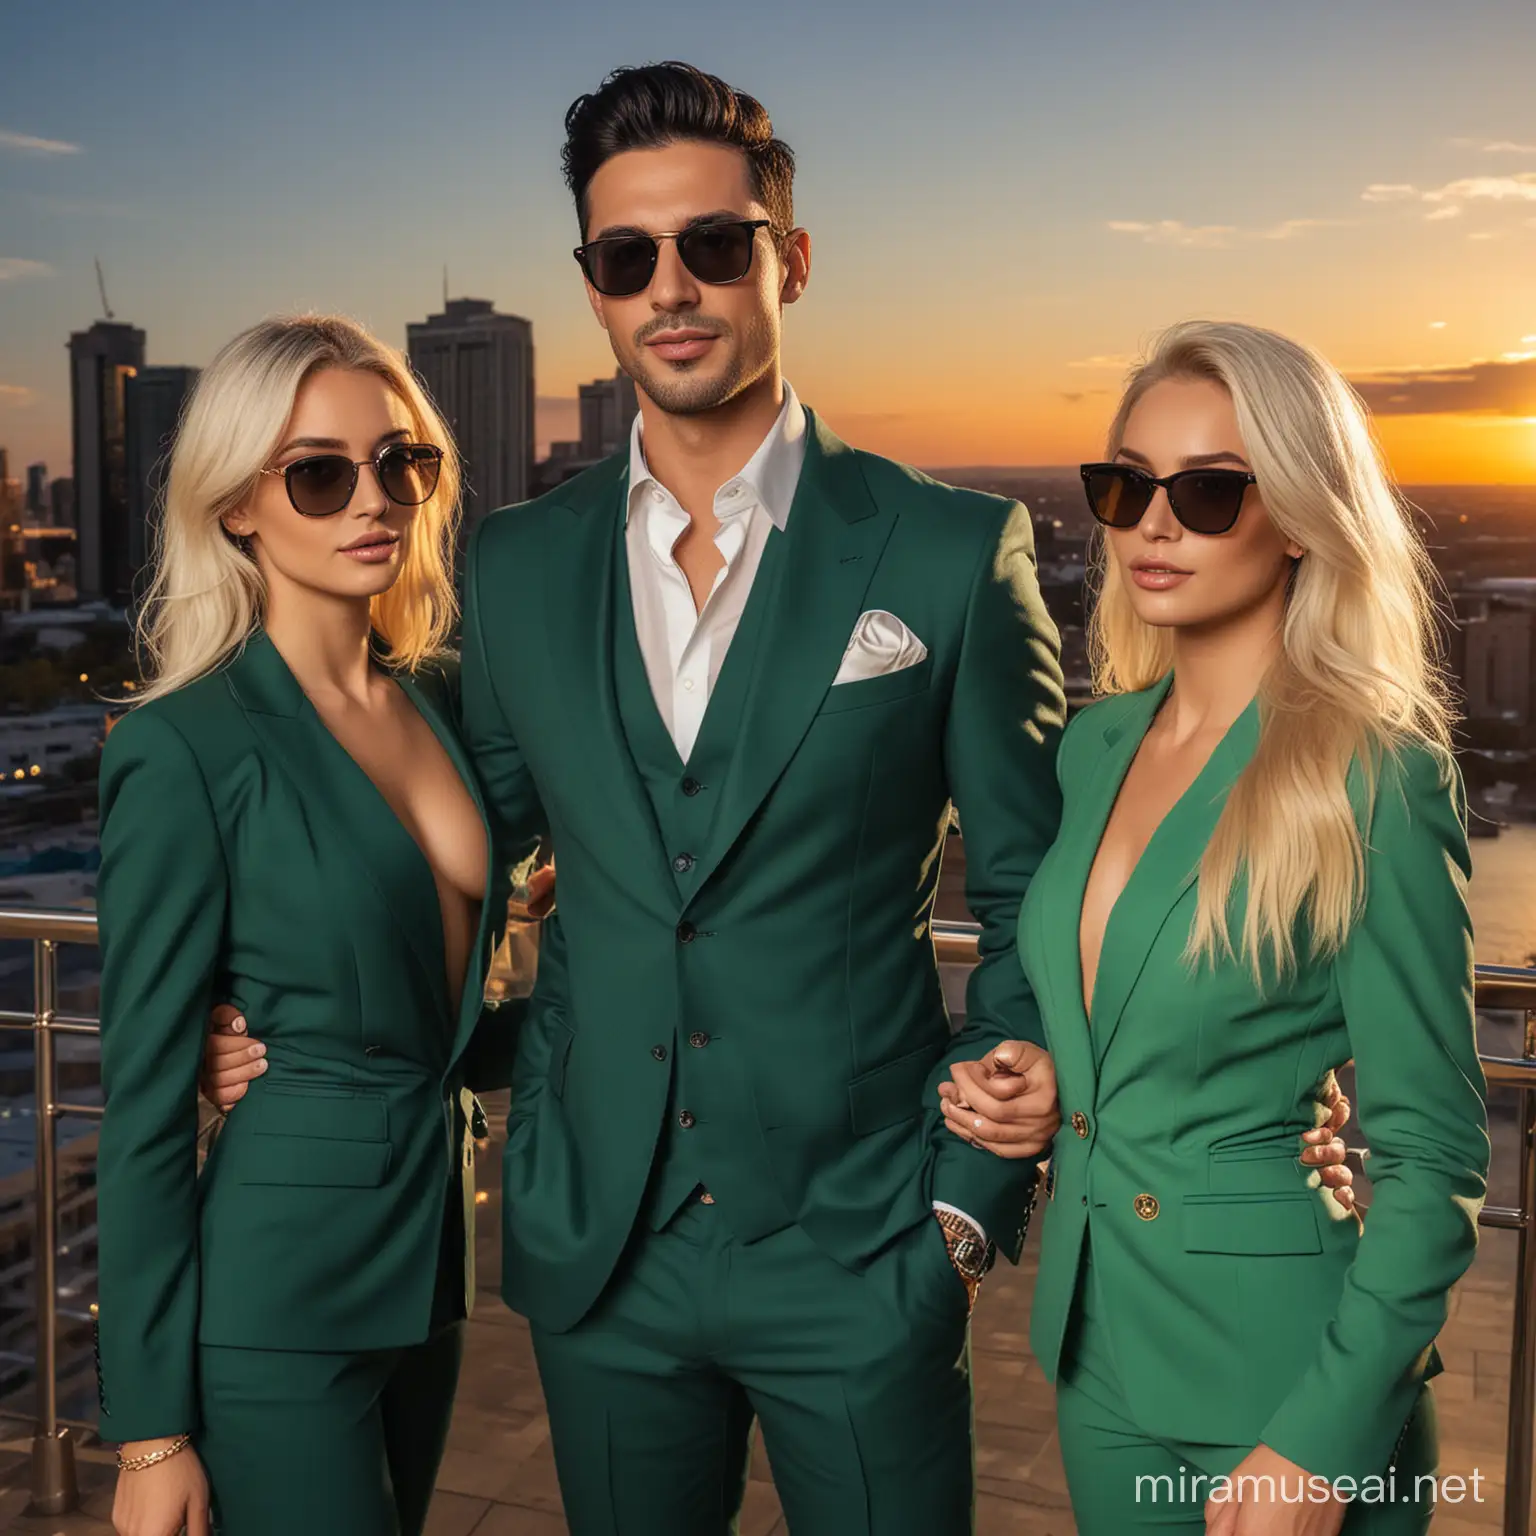 Elegant Man and Blonde Twins at Sunset in a Luxurious Club